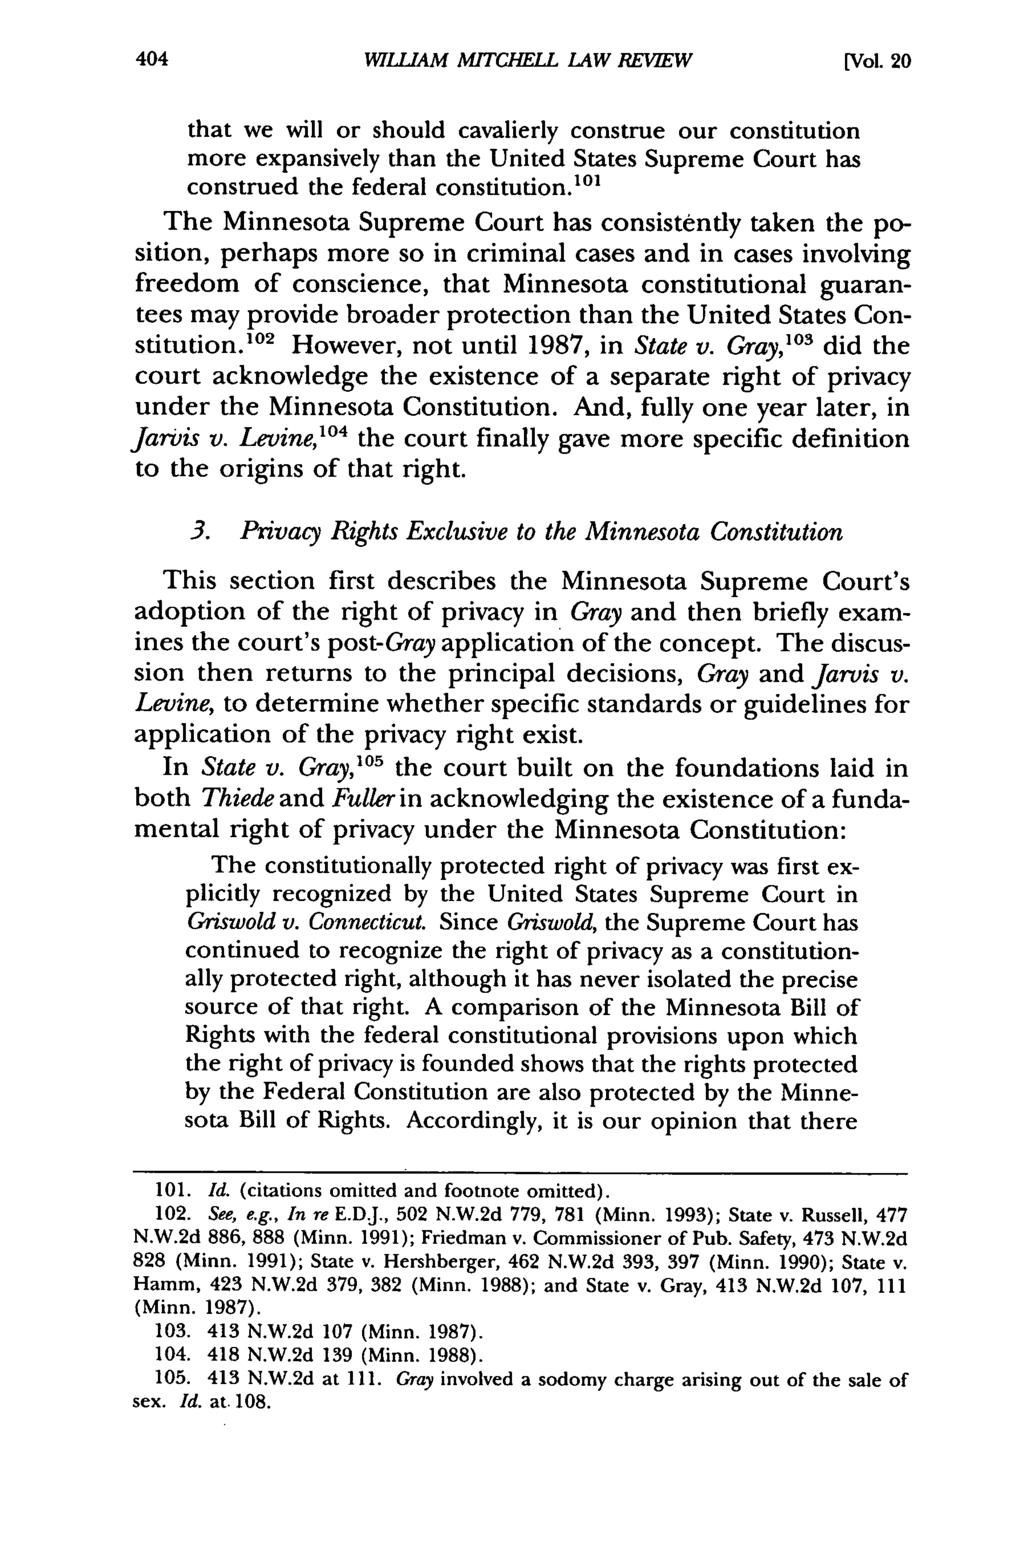 William Mitchell Law Review, Vol. 20, Iss. 2 [1994], Art. 6 http://open.